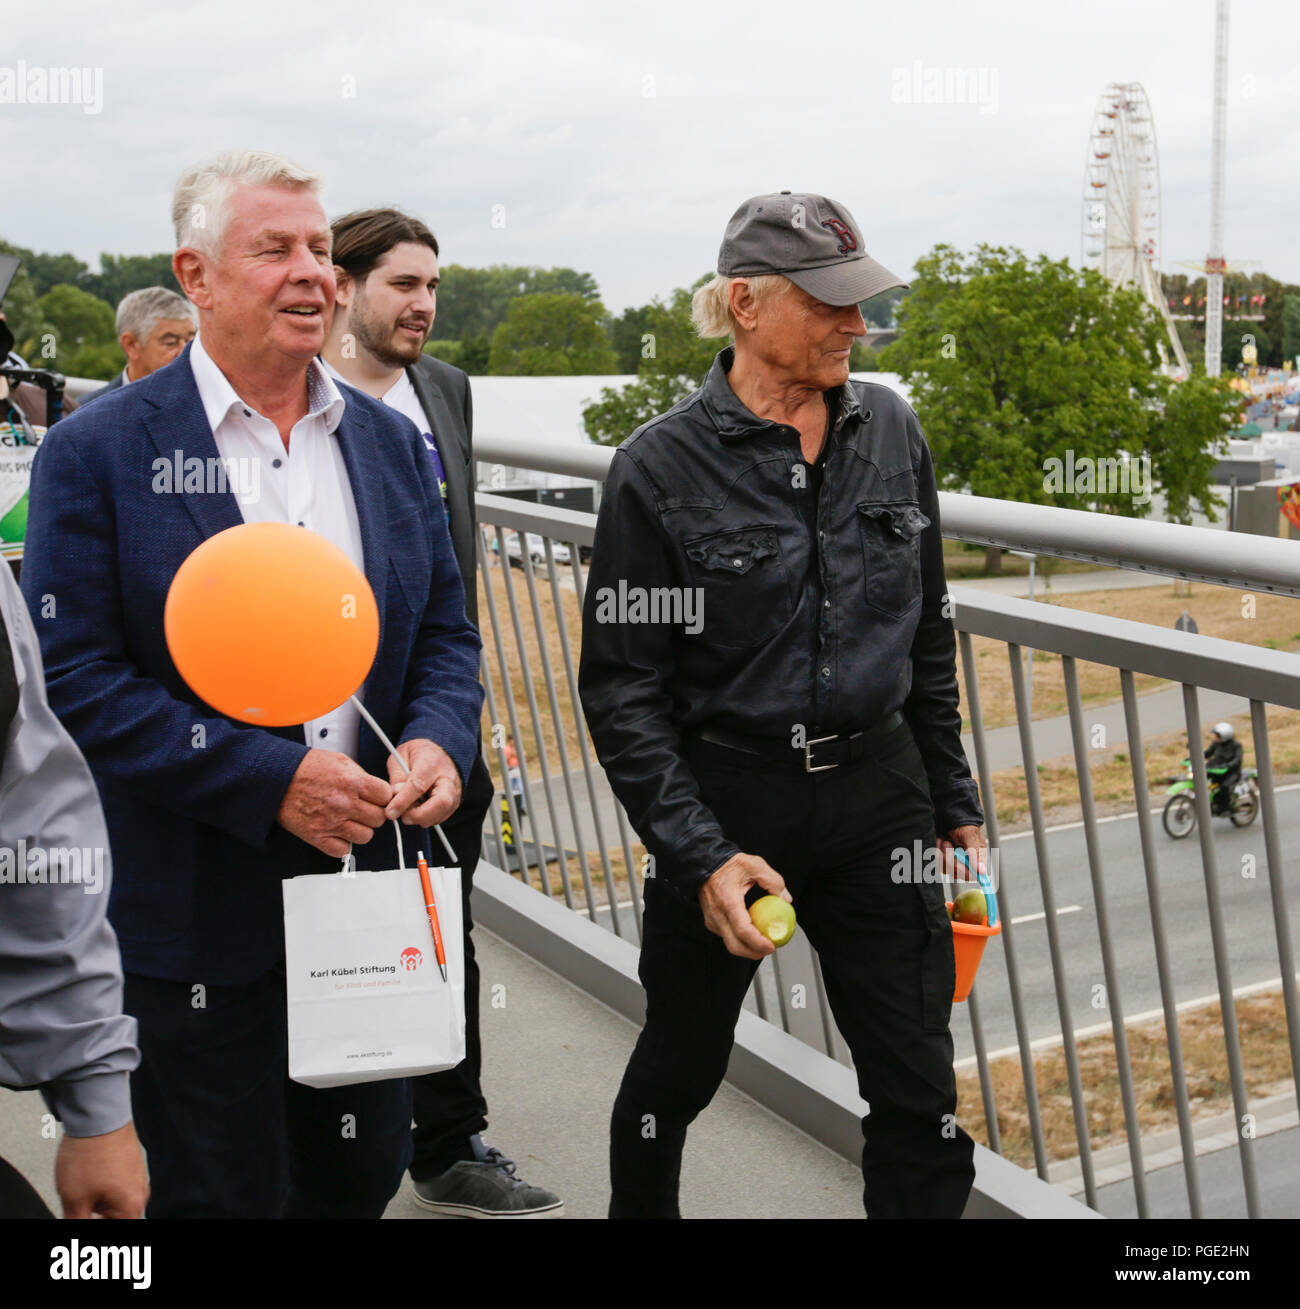 Worms, Germany. 24th Aug, 2018. The Lord Mayor of Worms Michael Kissel (left) and Terence Hill (right) walk over the bridge. Italian actor Terence Hill visited the German city of Worms, to present his new movie (My Name is somebody). Terence Hill added the stop in Worms to his movie promotion tour in Germany, to visit a pedestrian bridge, that is unofficially named Terence-Hill-Bridge (officially Karl-Kubel-Bridge). Credit: Michael Debets/Pacific Press/Alamy Live News Stock Photo